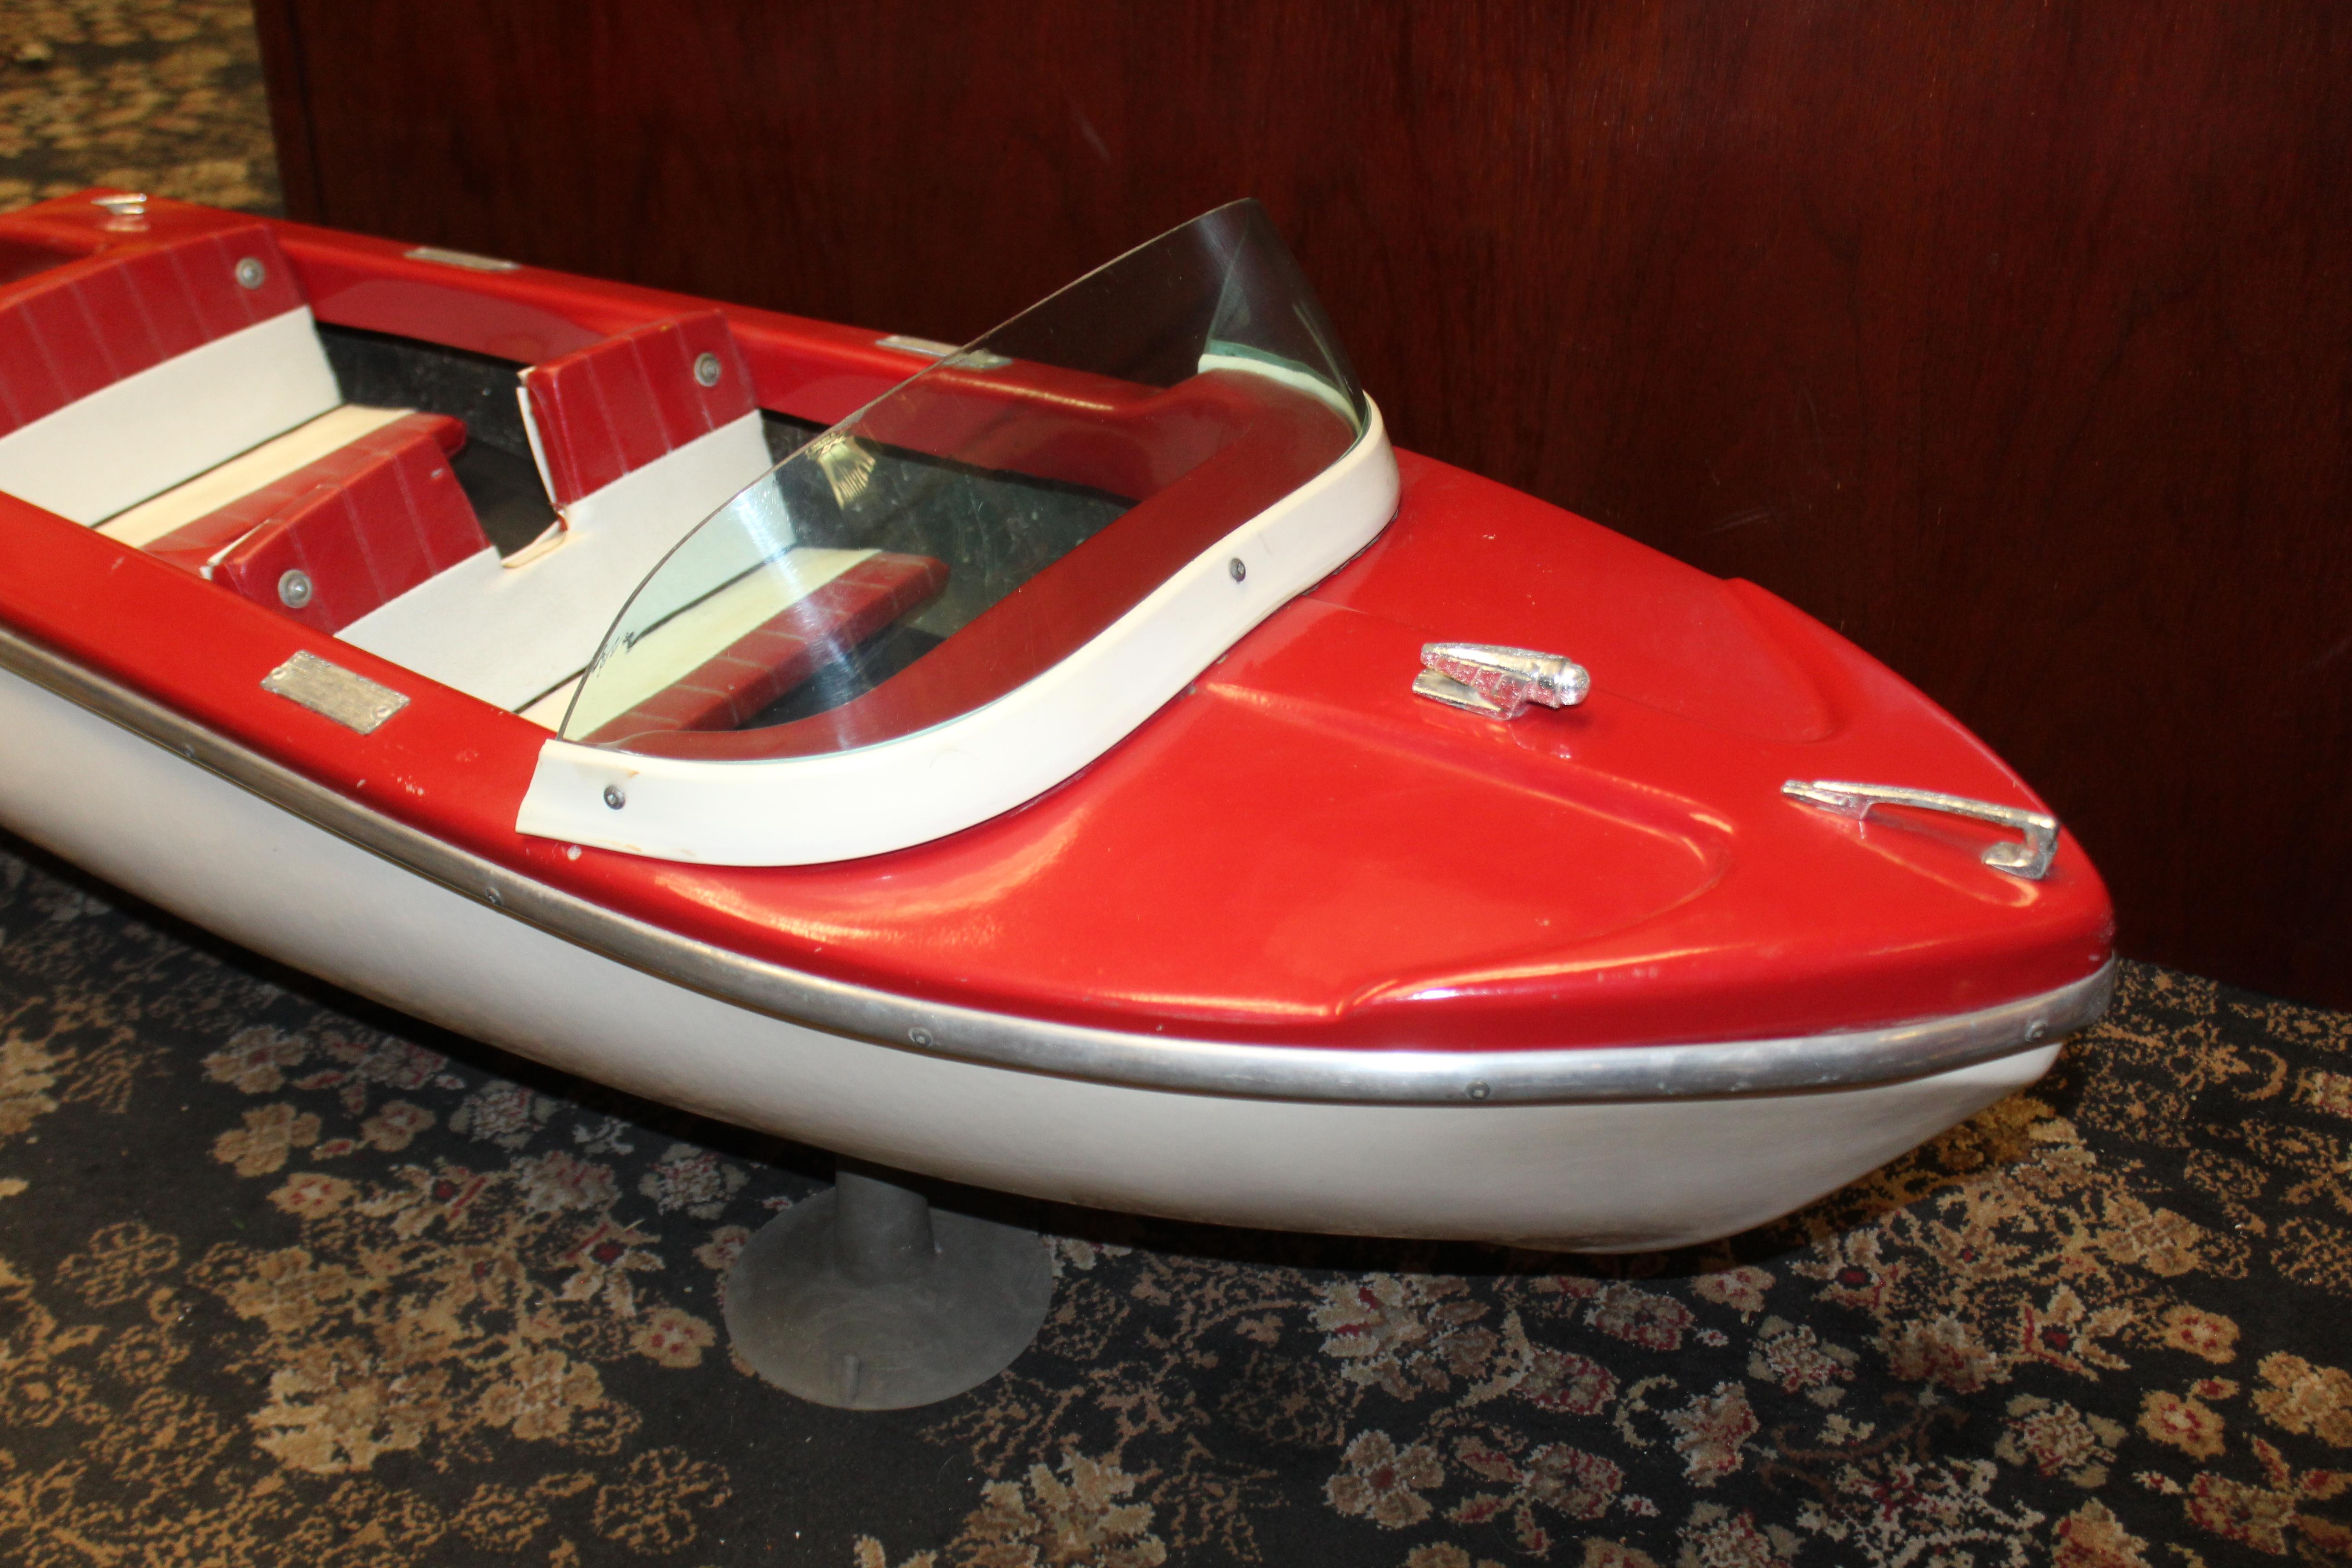 Fiberglass model boat Mfg by Aluminum Boat & Canoe. This is a smaller scaled boat with suction cups at the bottom of boat. This boat was most likely a salesman sample or a window display for the store.